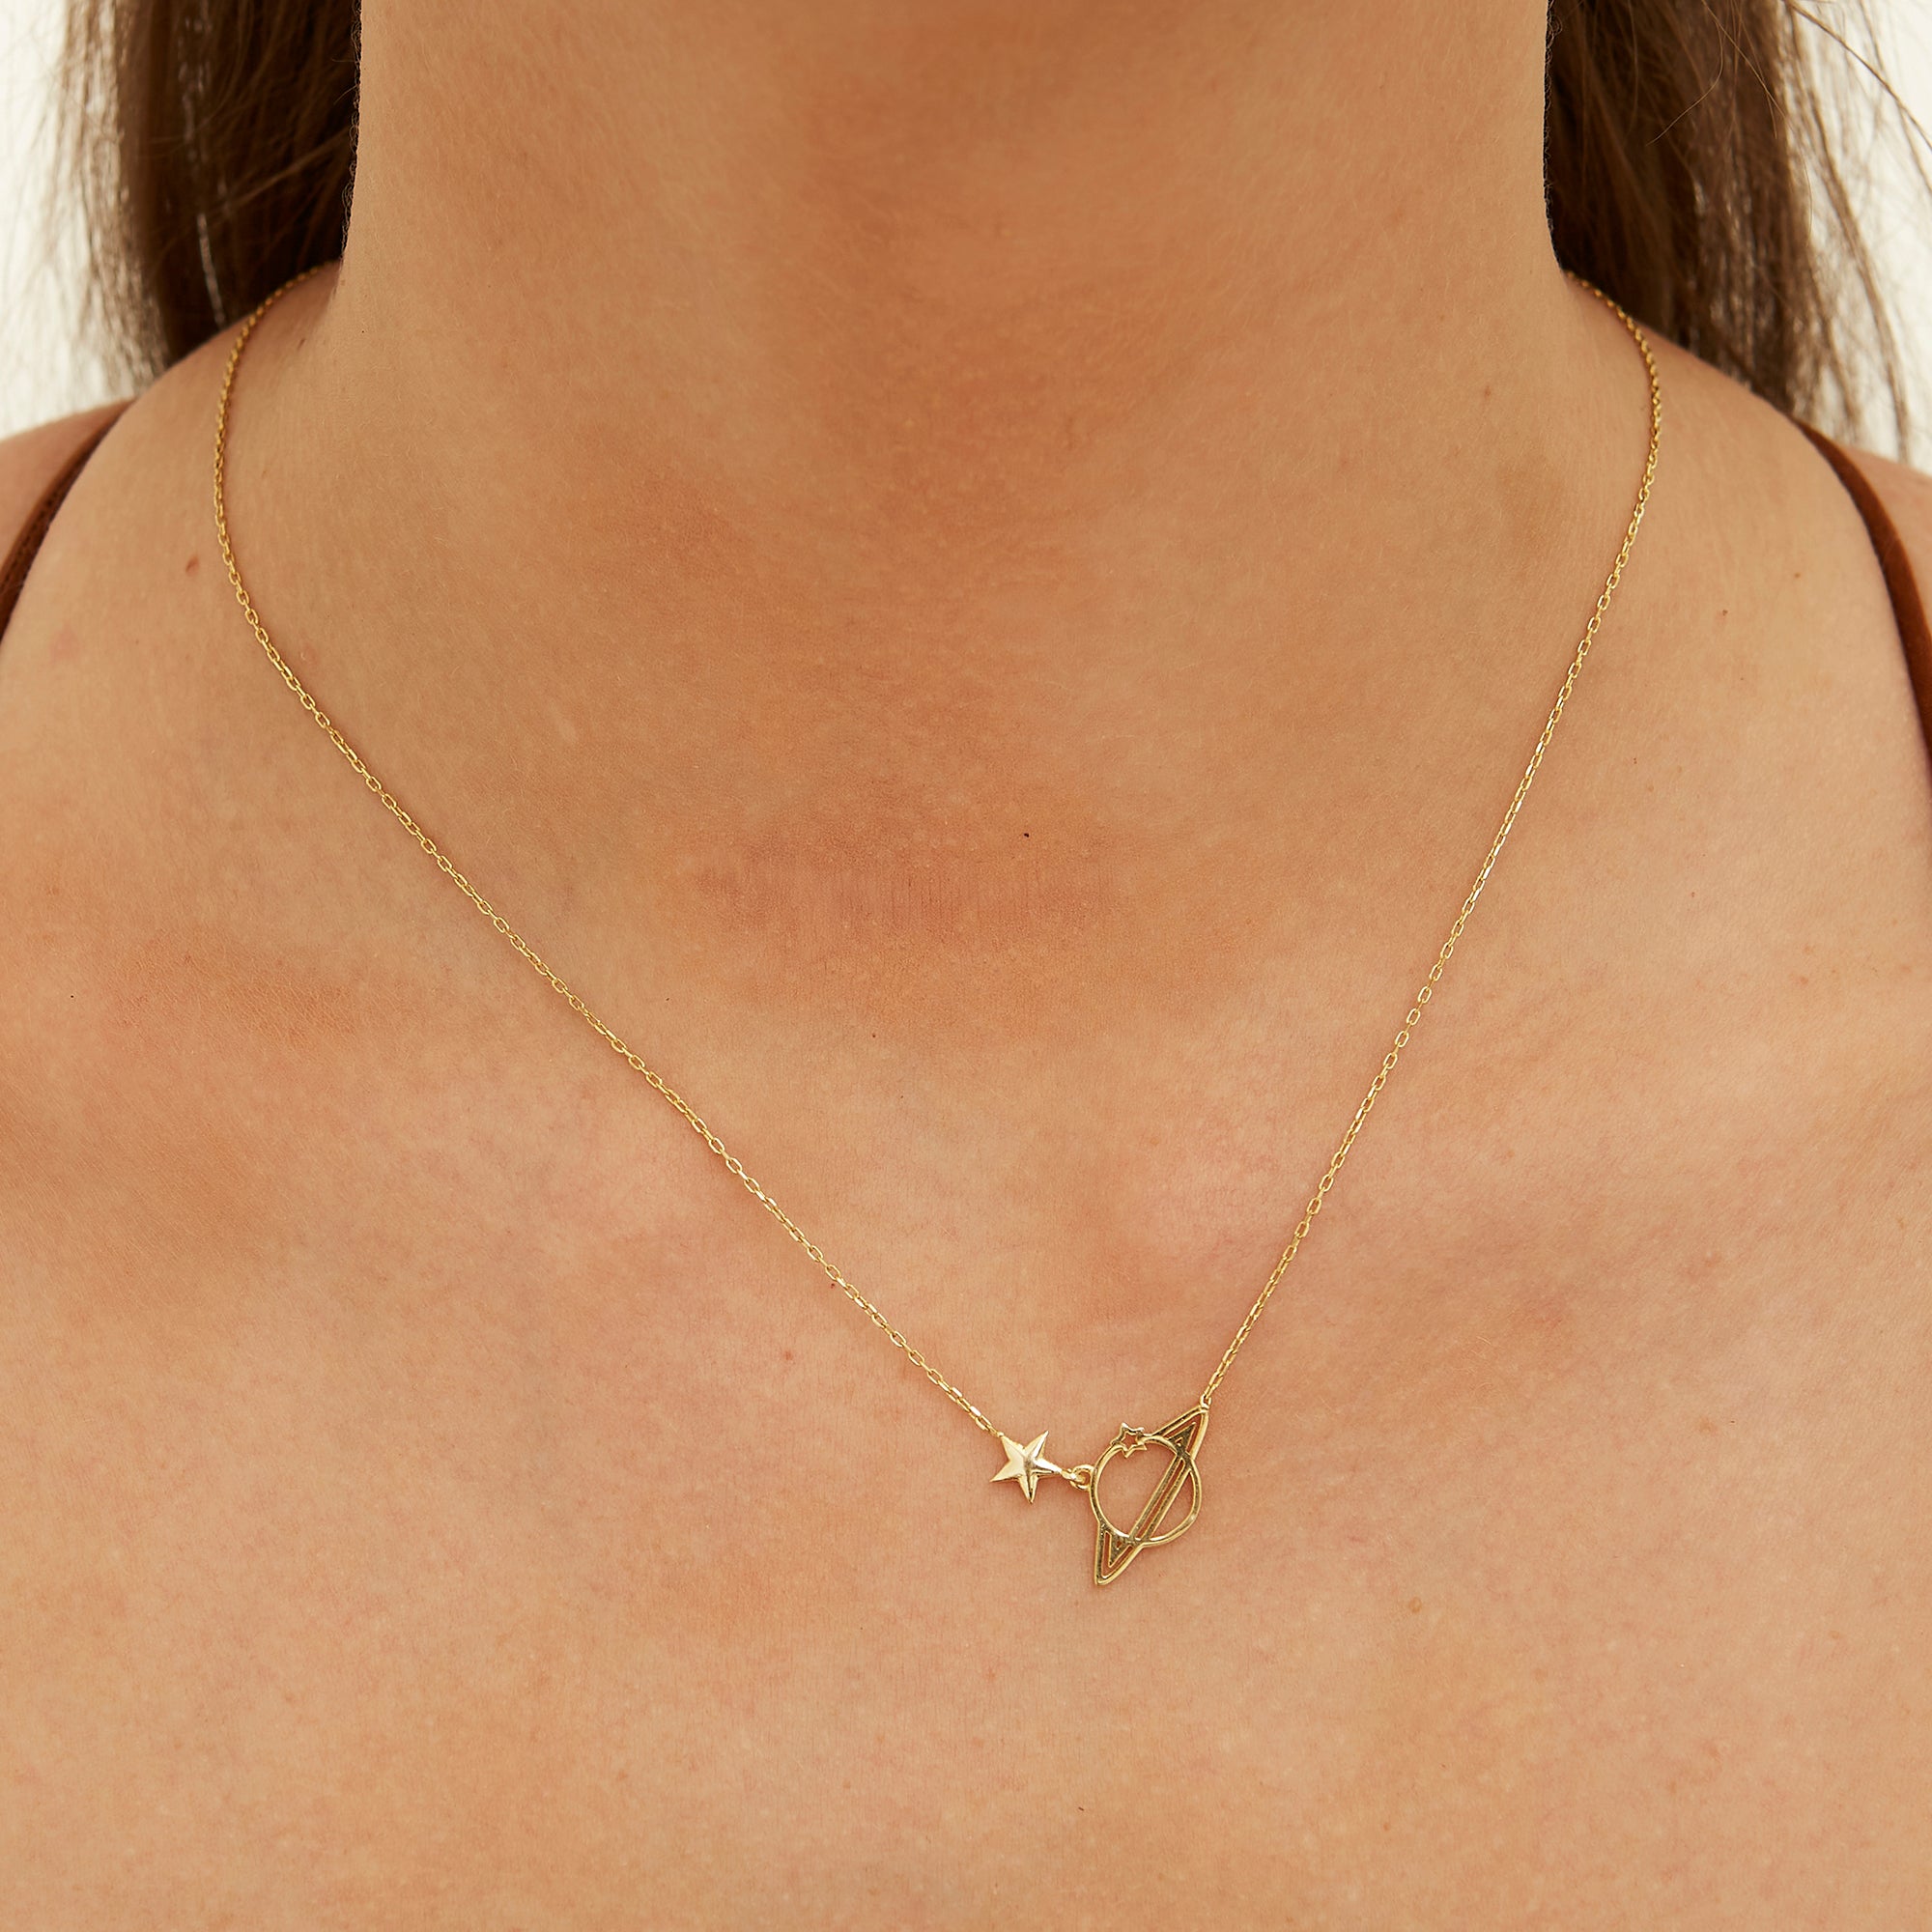 Sterling Silver Saturn Necklace - Spero London